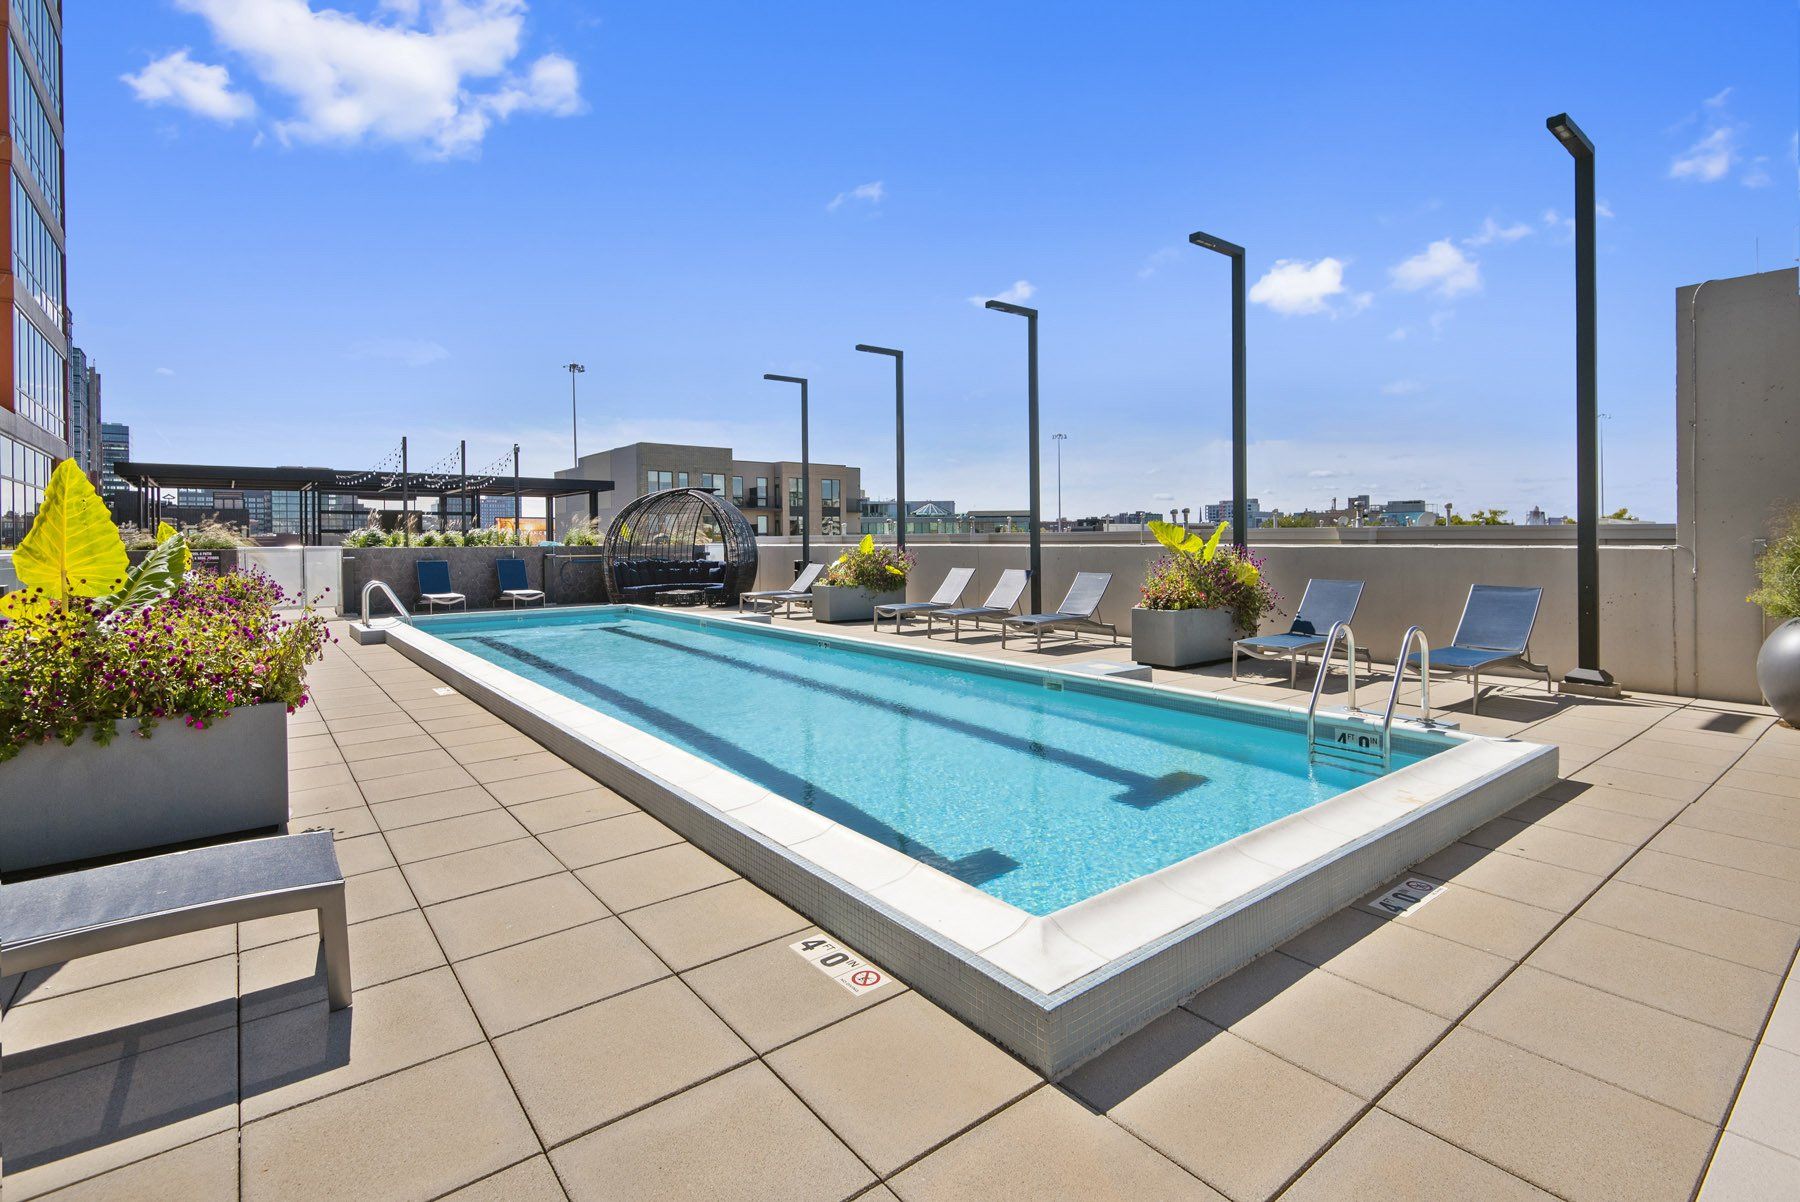 A large swimming pool on the roof of a building at Reside on Green Street.